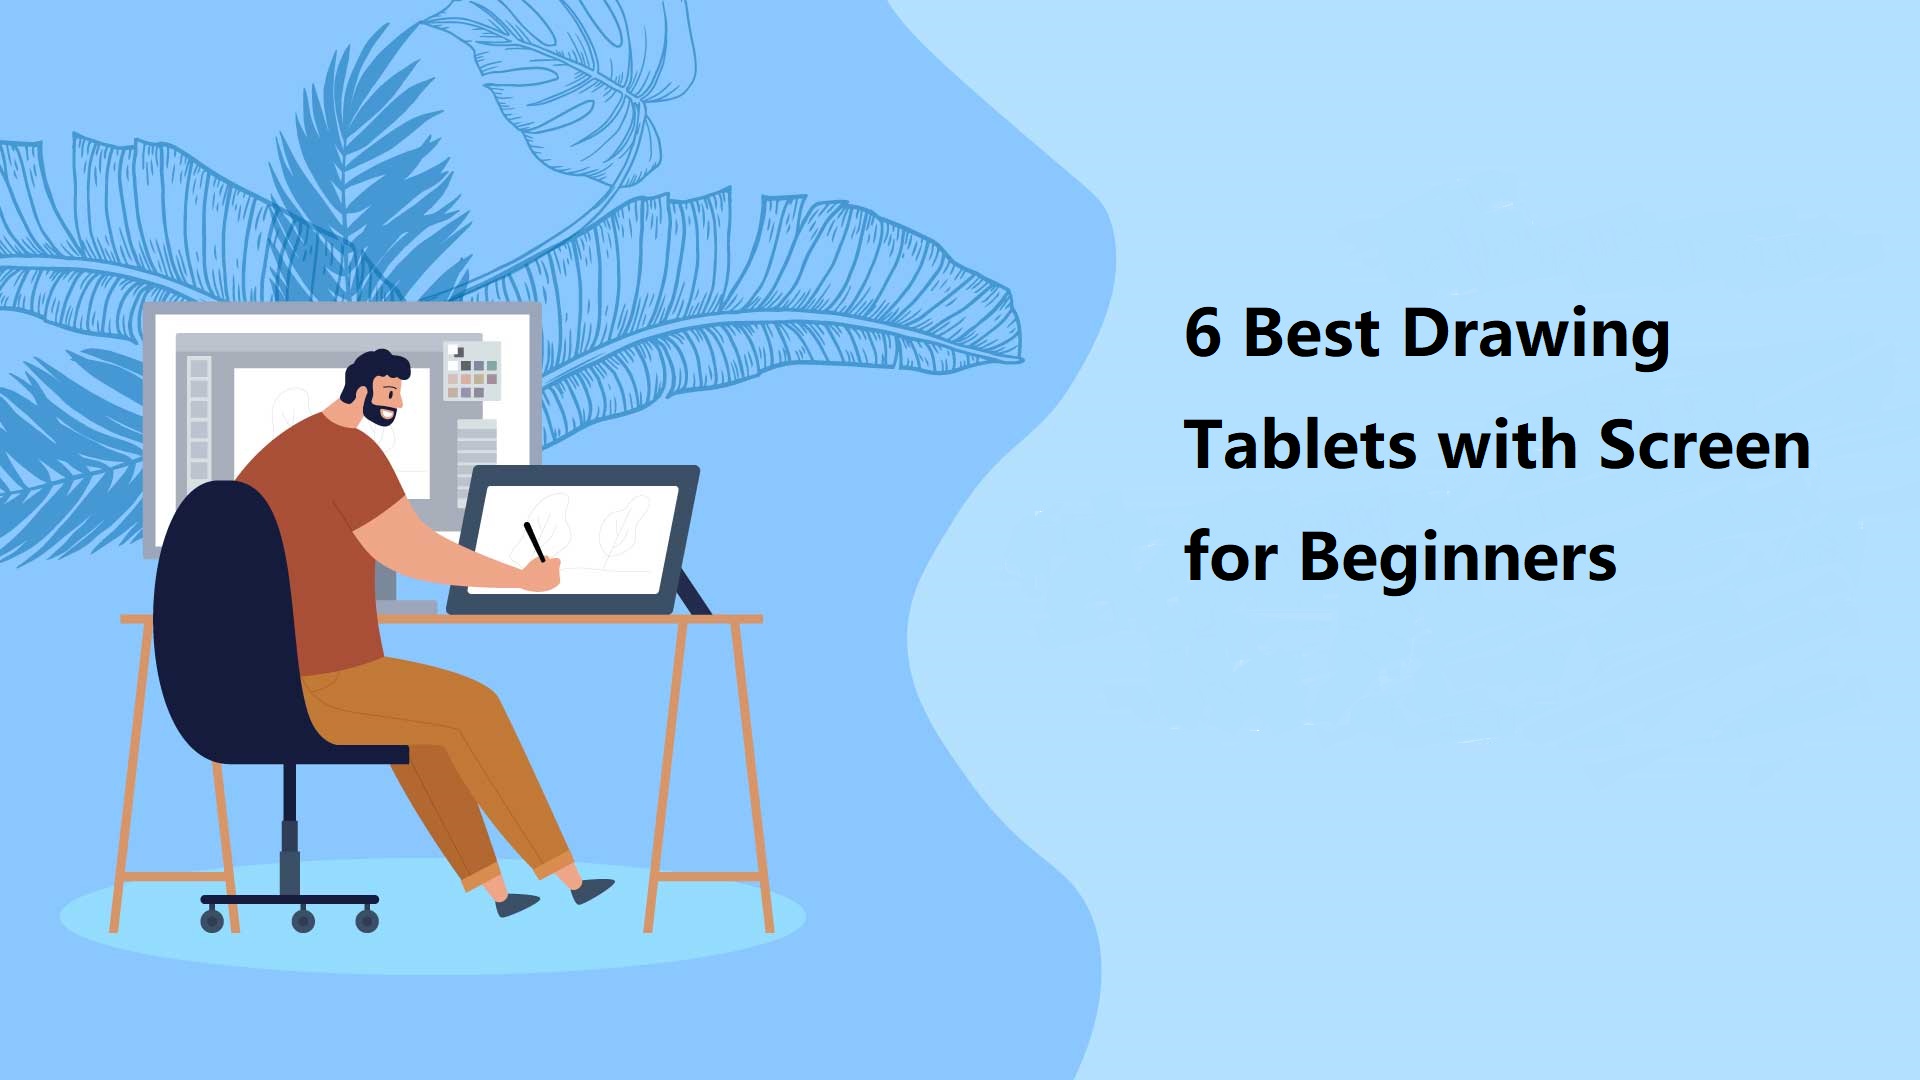 How to ChooseThe Best Drawing Paper for Beginners | by Kevin Hayler | Medium